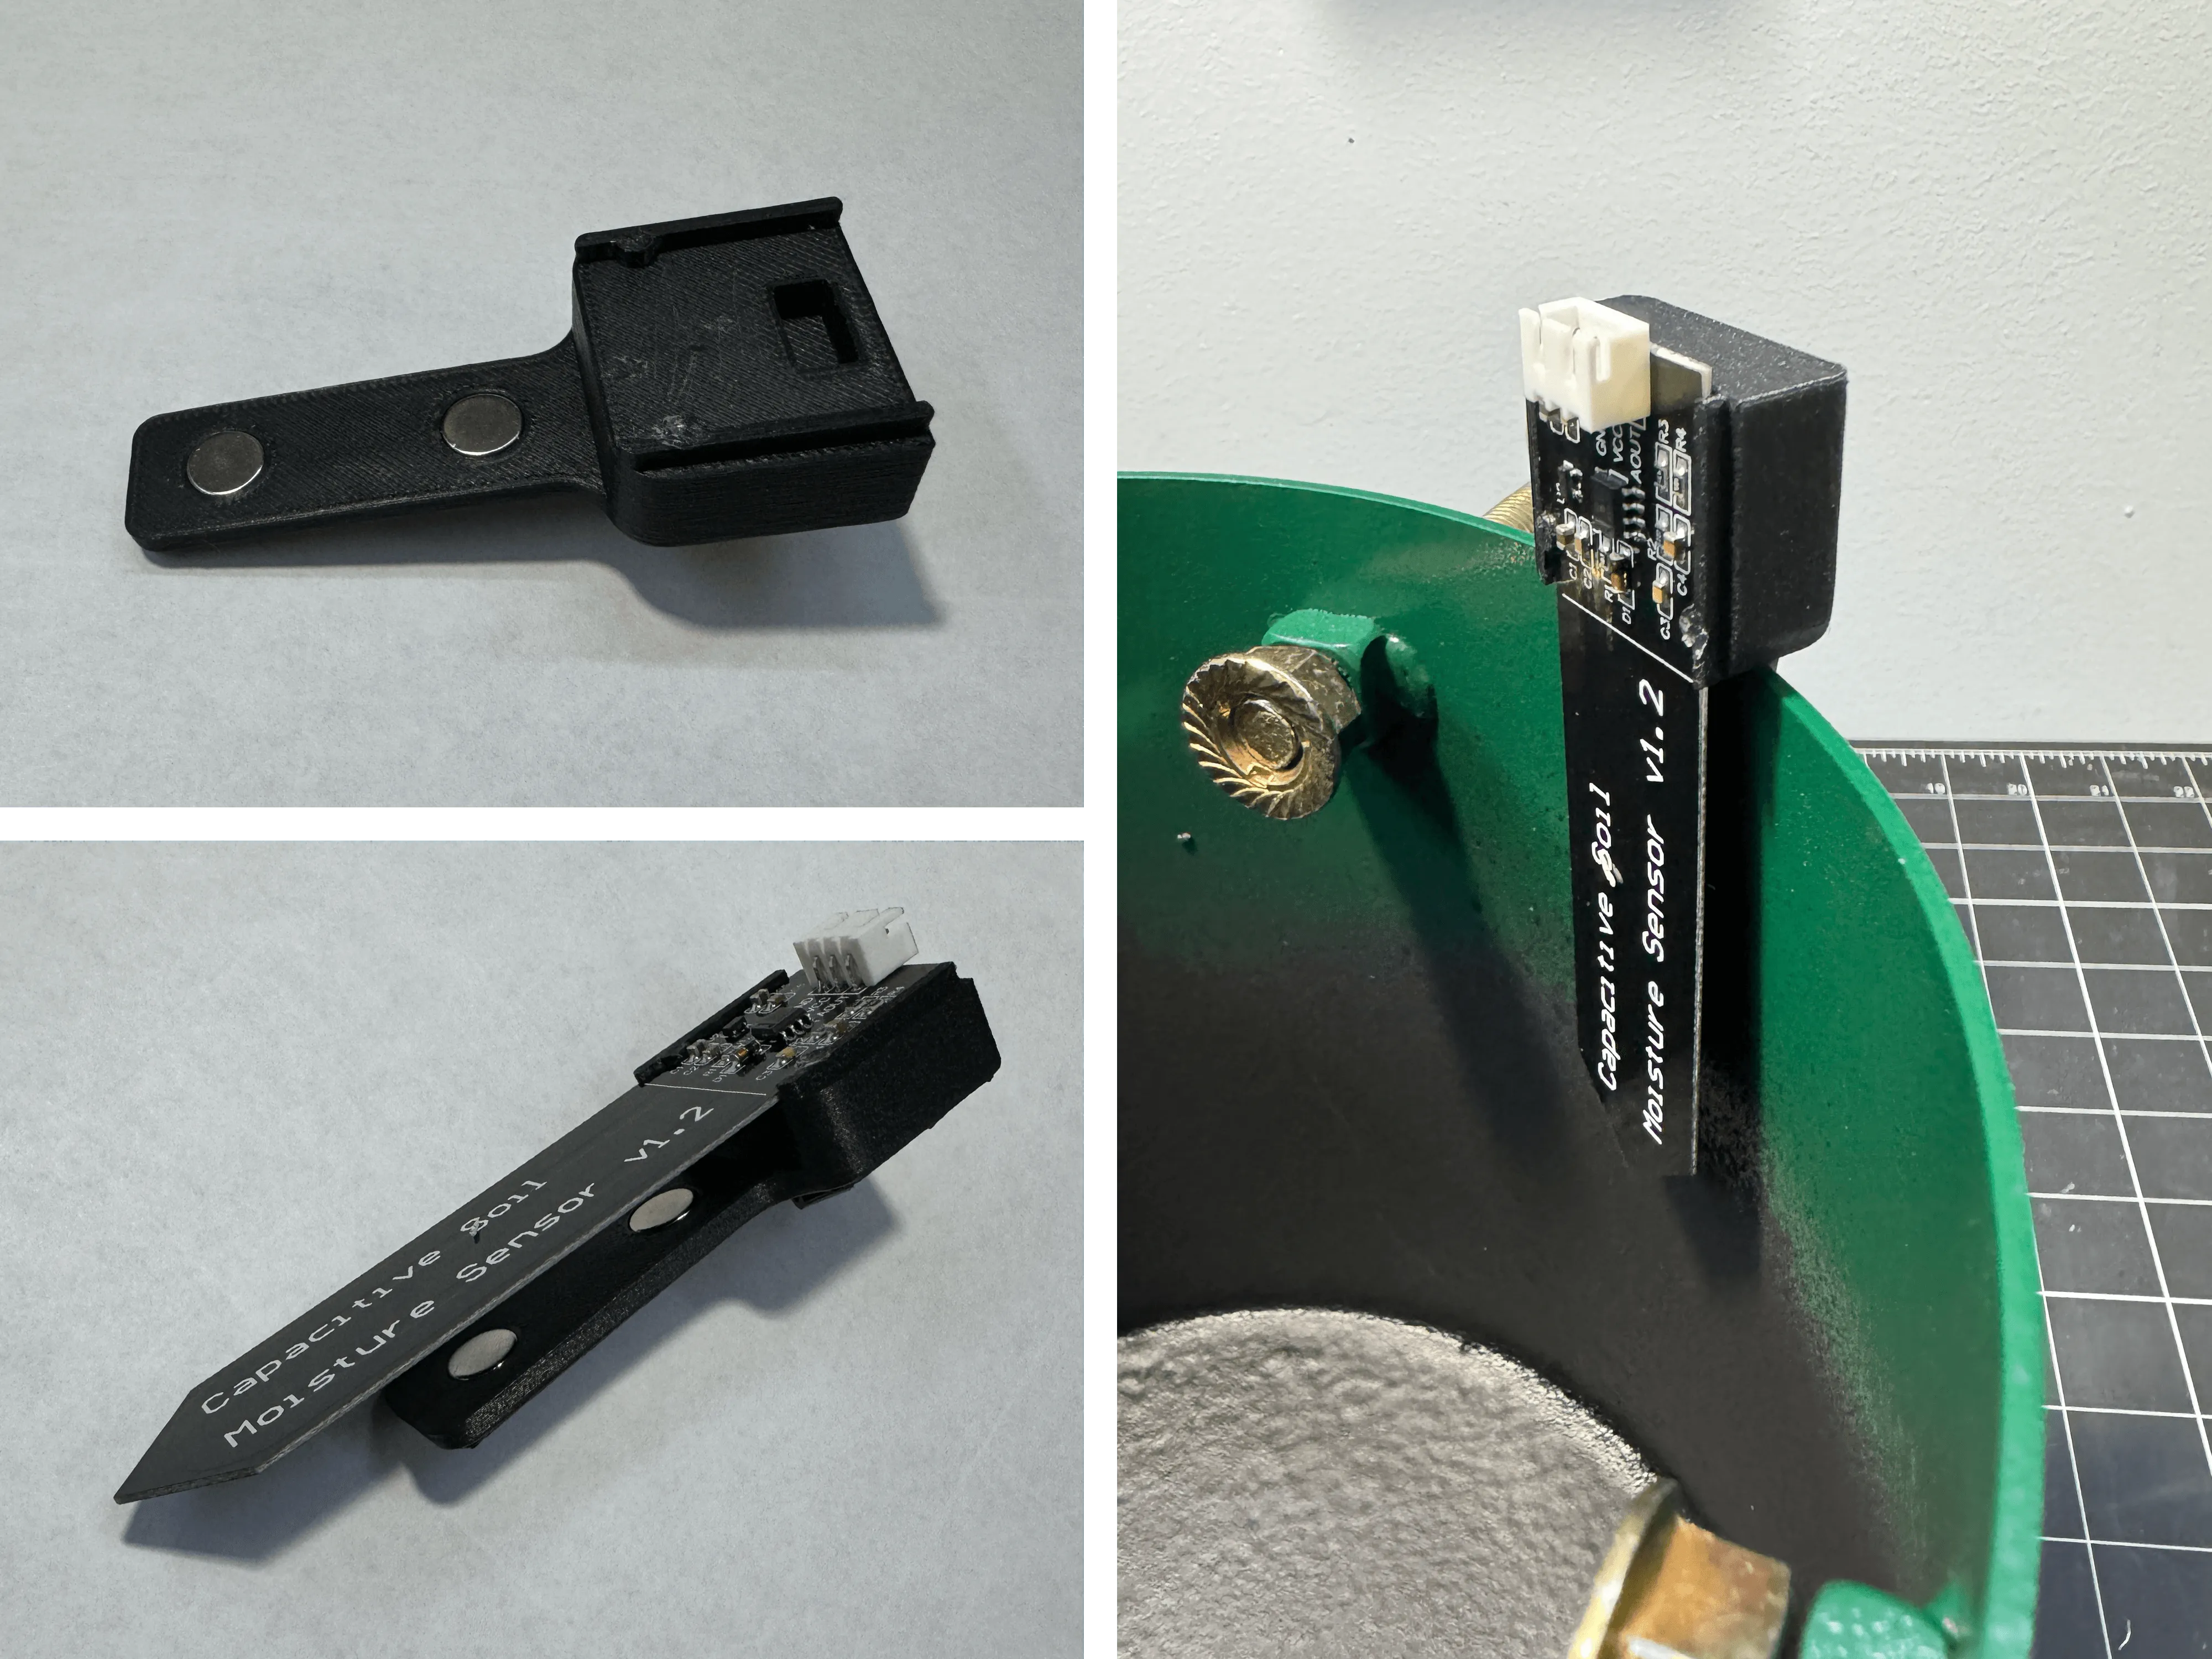 Different perspectives of the 3D printed moisture sensor mount